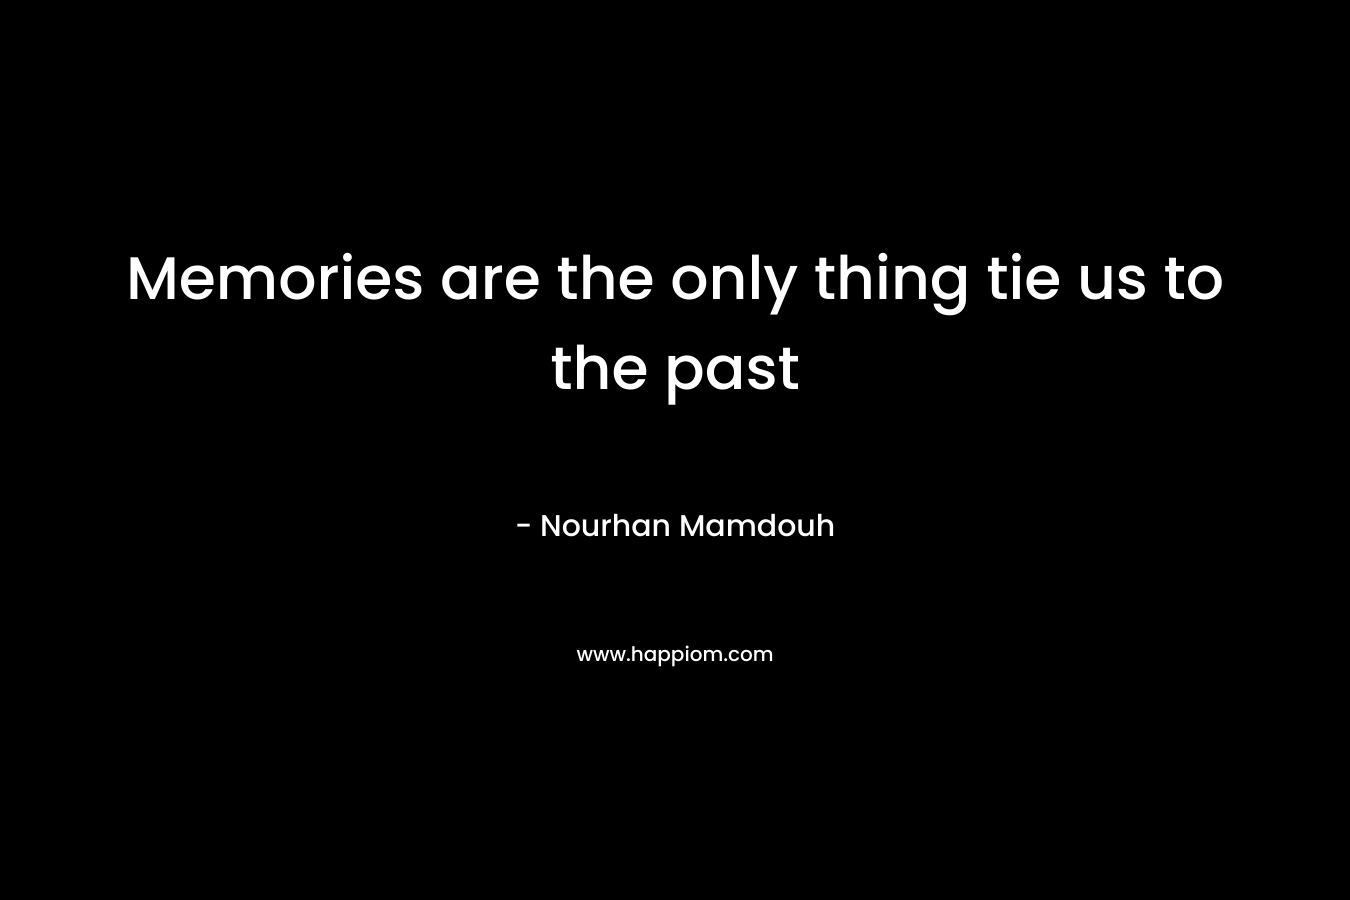 Memories are the only thing tie us to the past